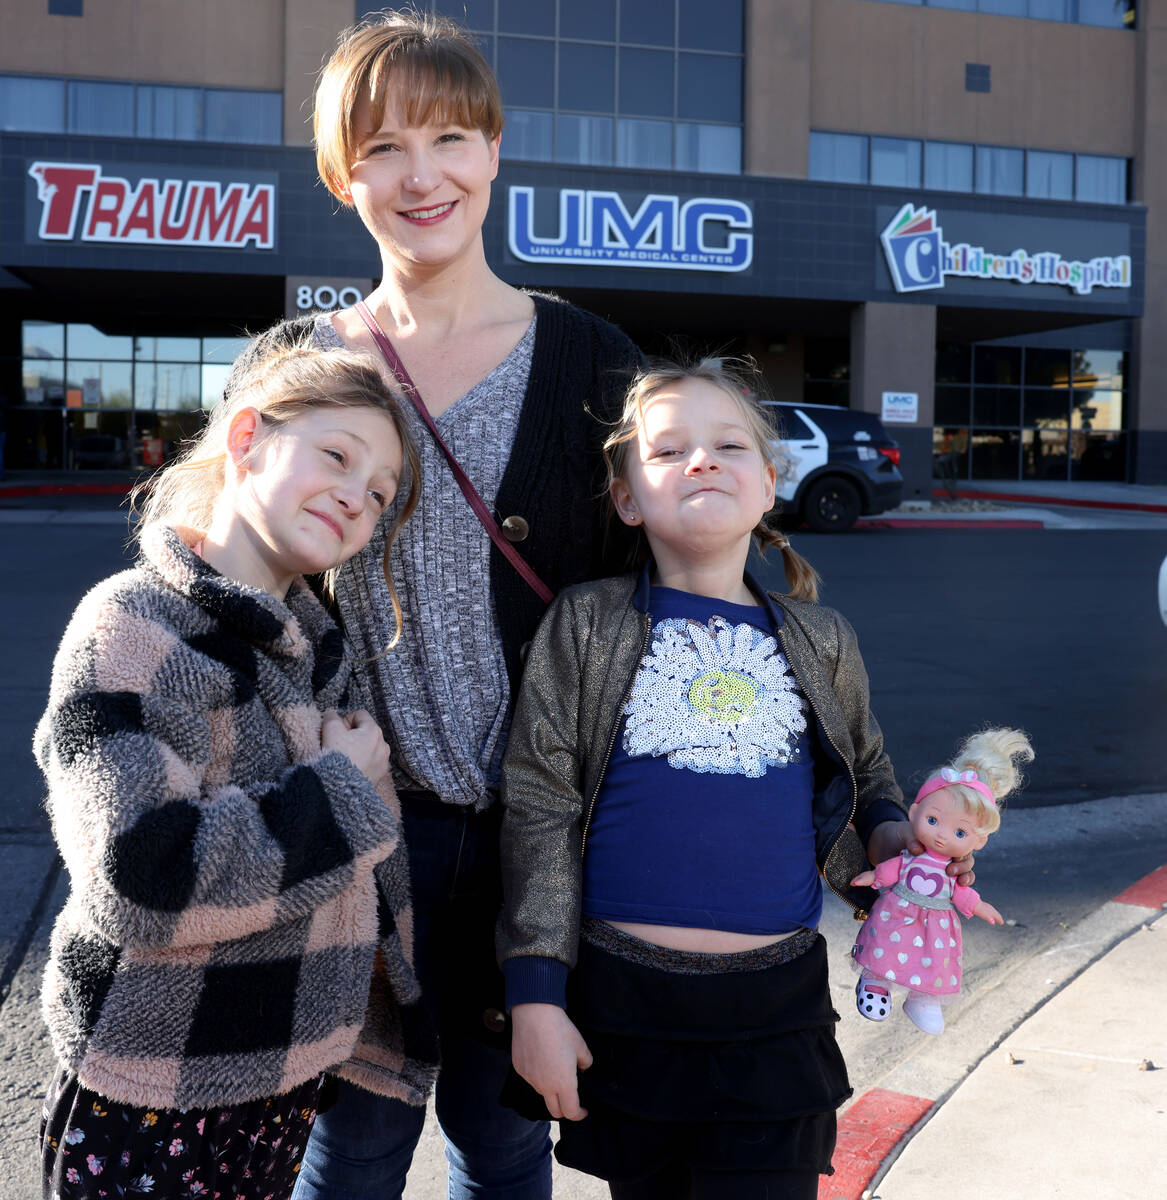 Jaimie Woodworth with her children Paige, 8, and Piper, 6, before a medical appointment at Univ ...